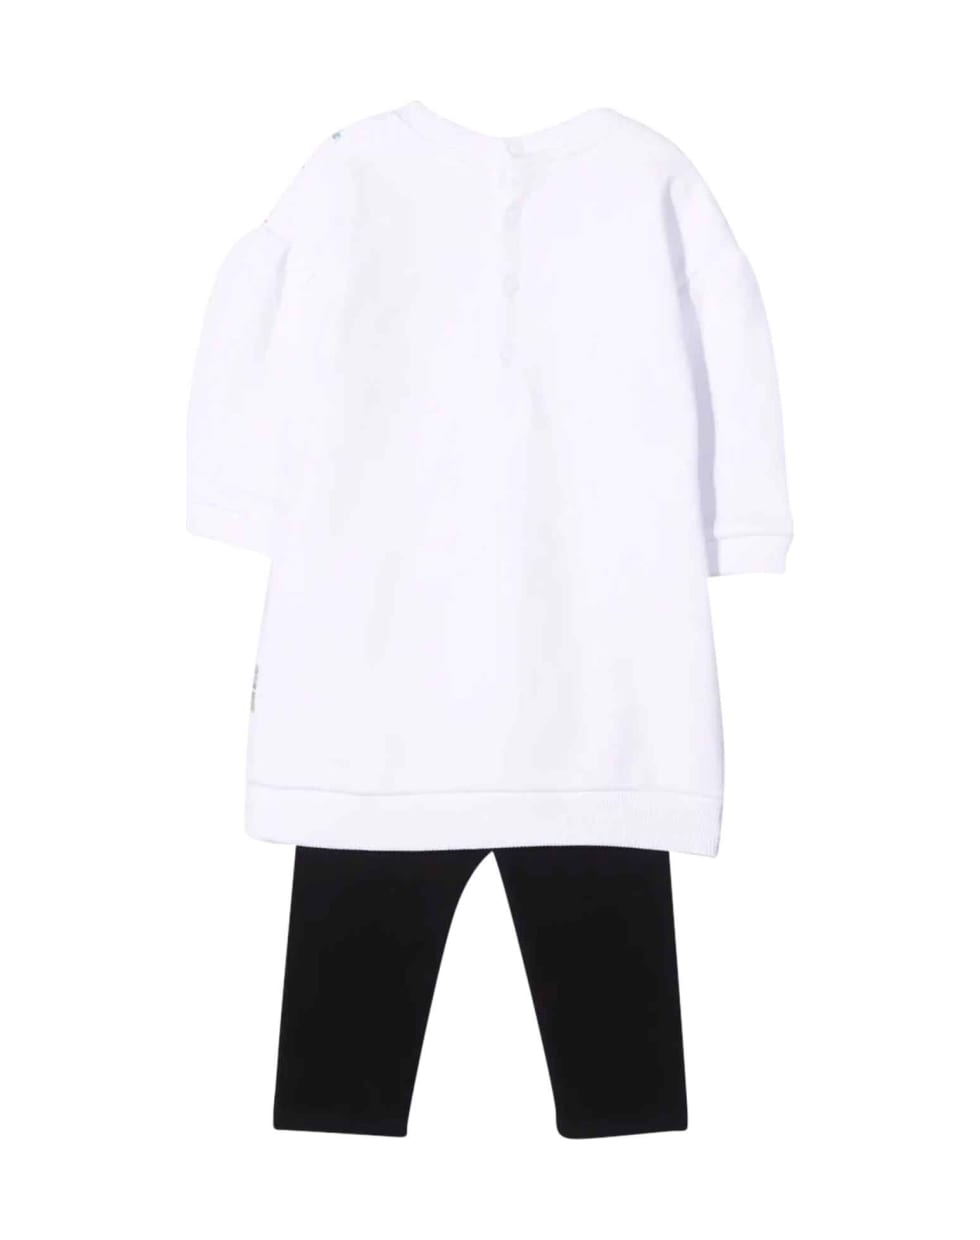 Givenchy Newborn Outfit - Bianco/nero